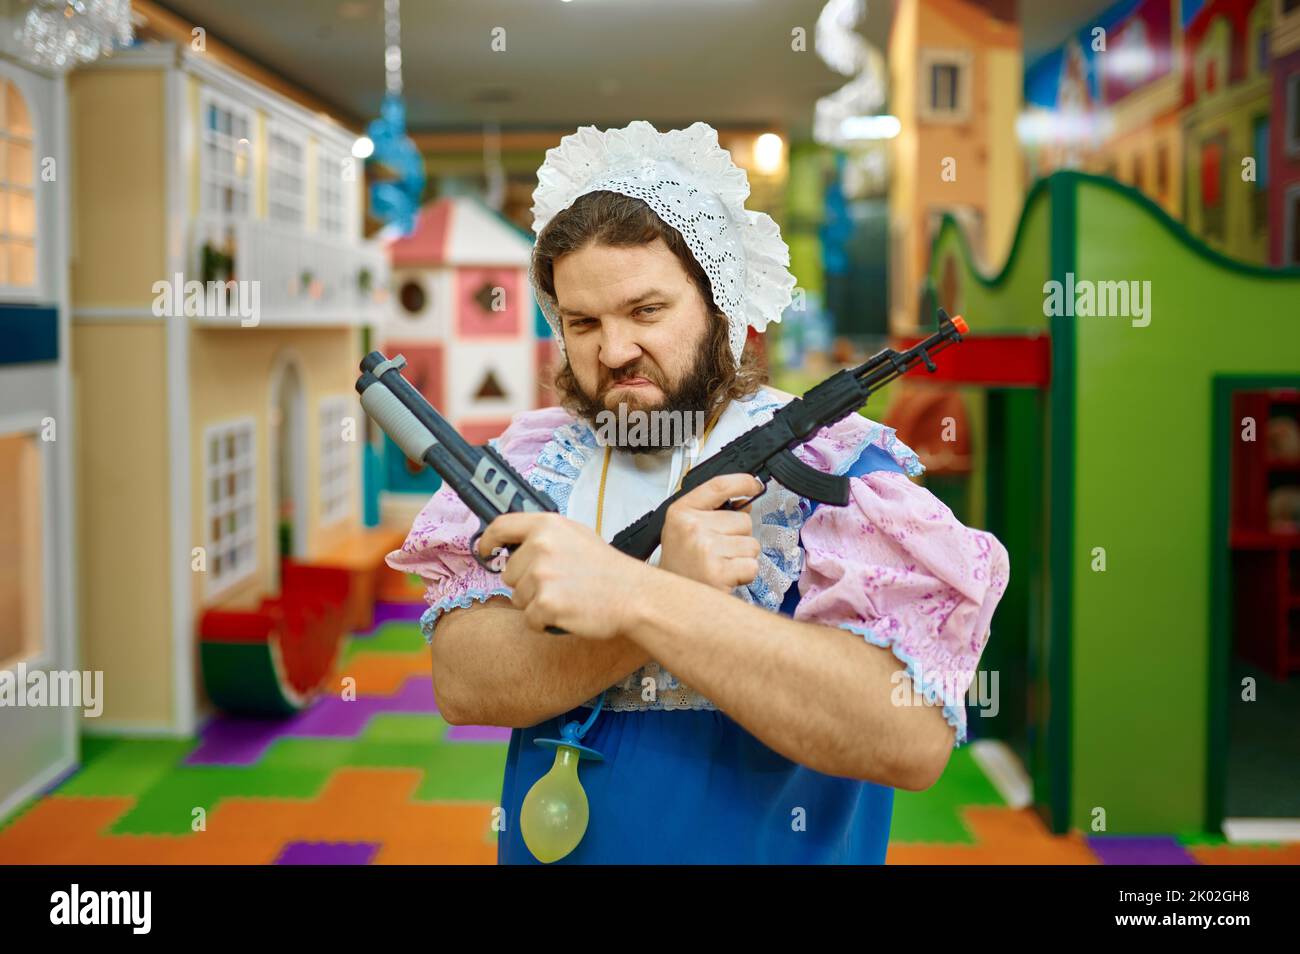 Funny baby man criminal posing with toy weapon Stock Photo